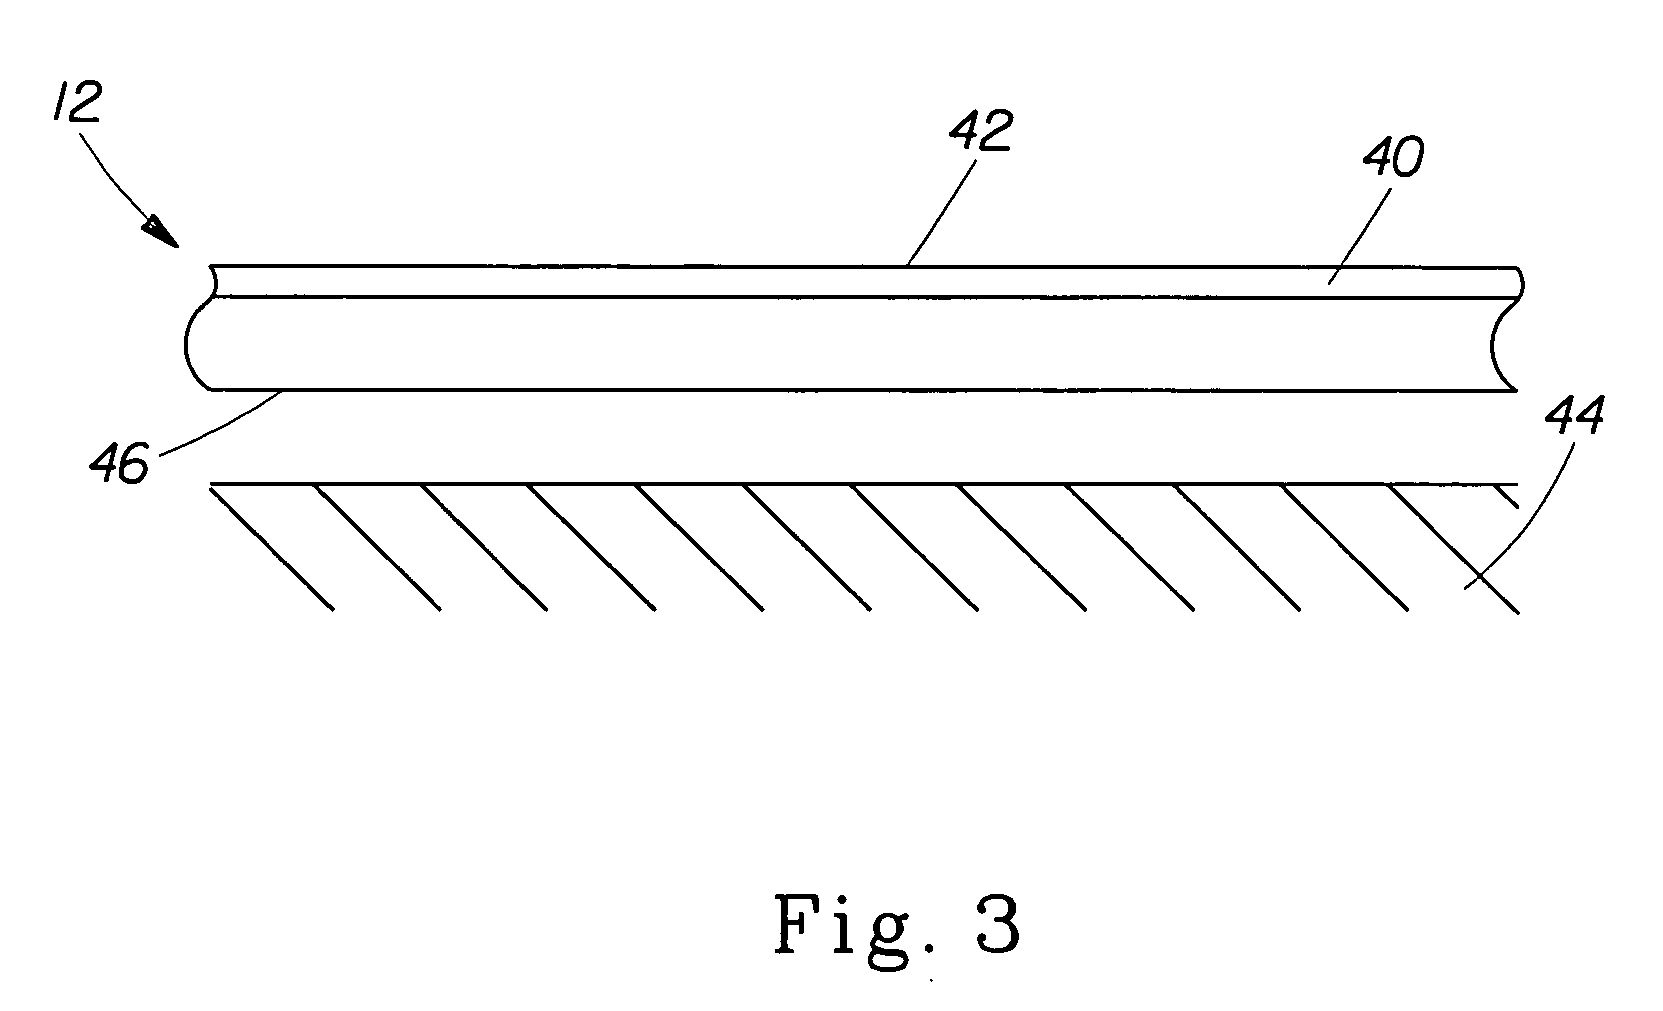 Treatment articles capable of conforming to an underlying shape